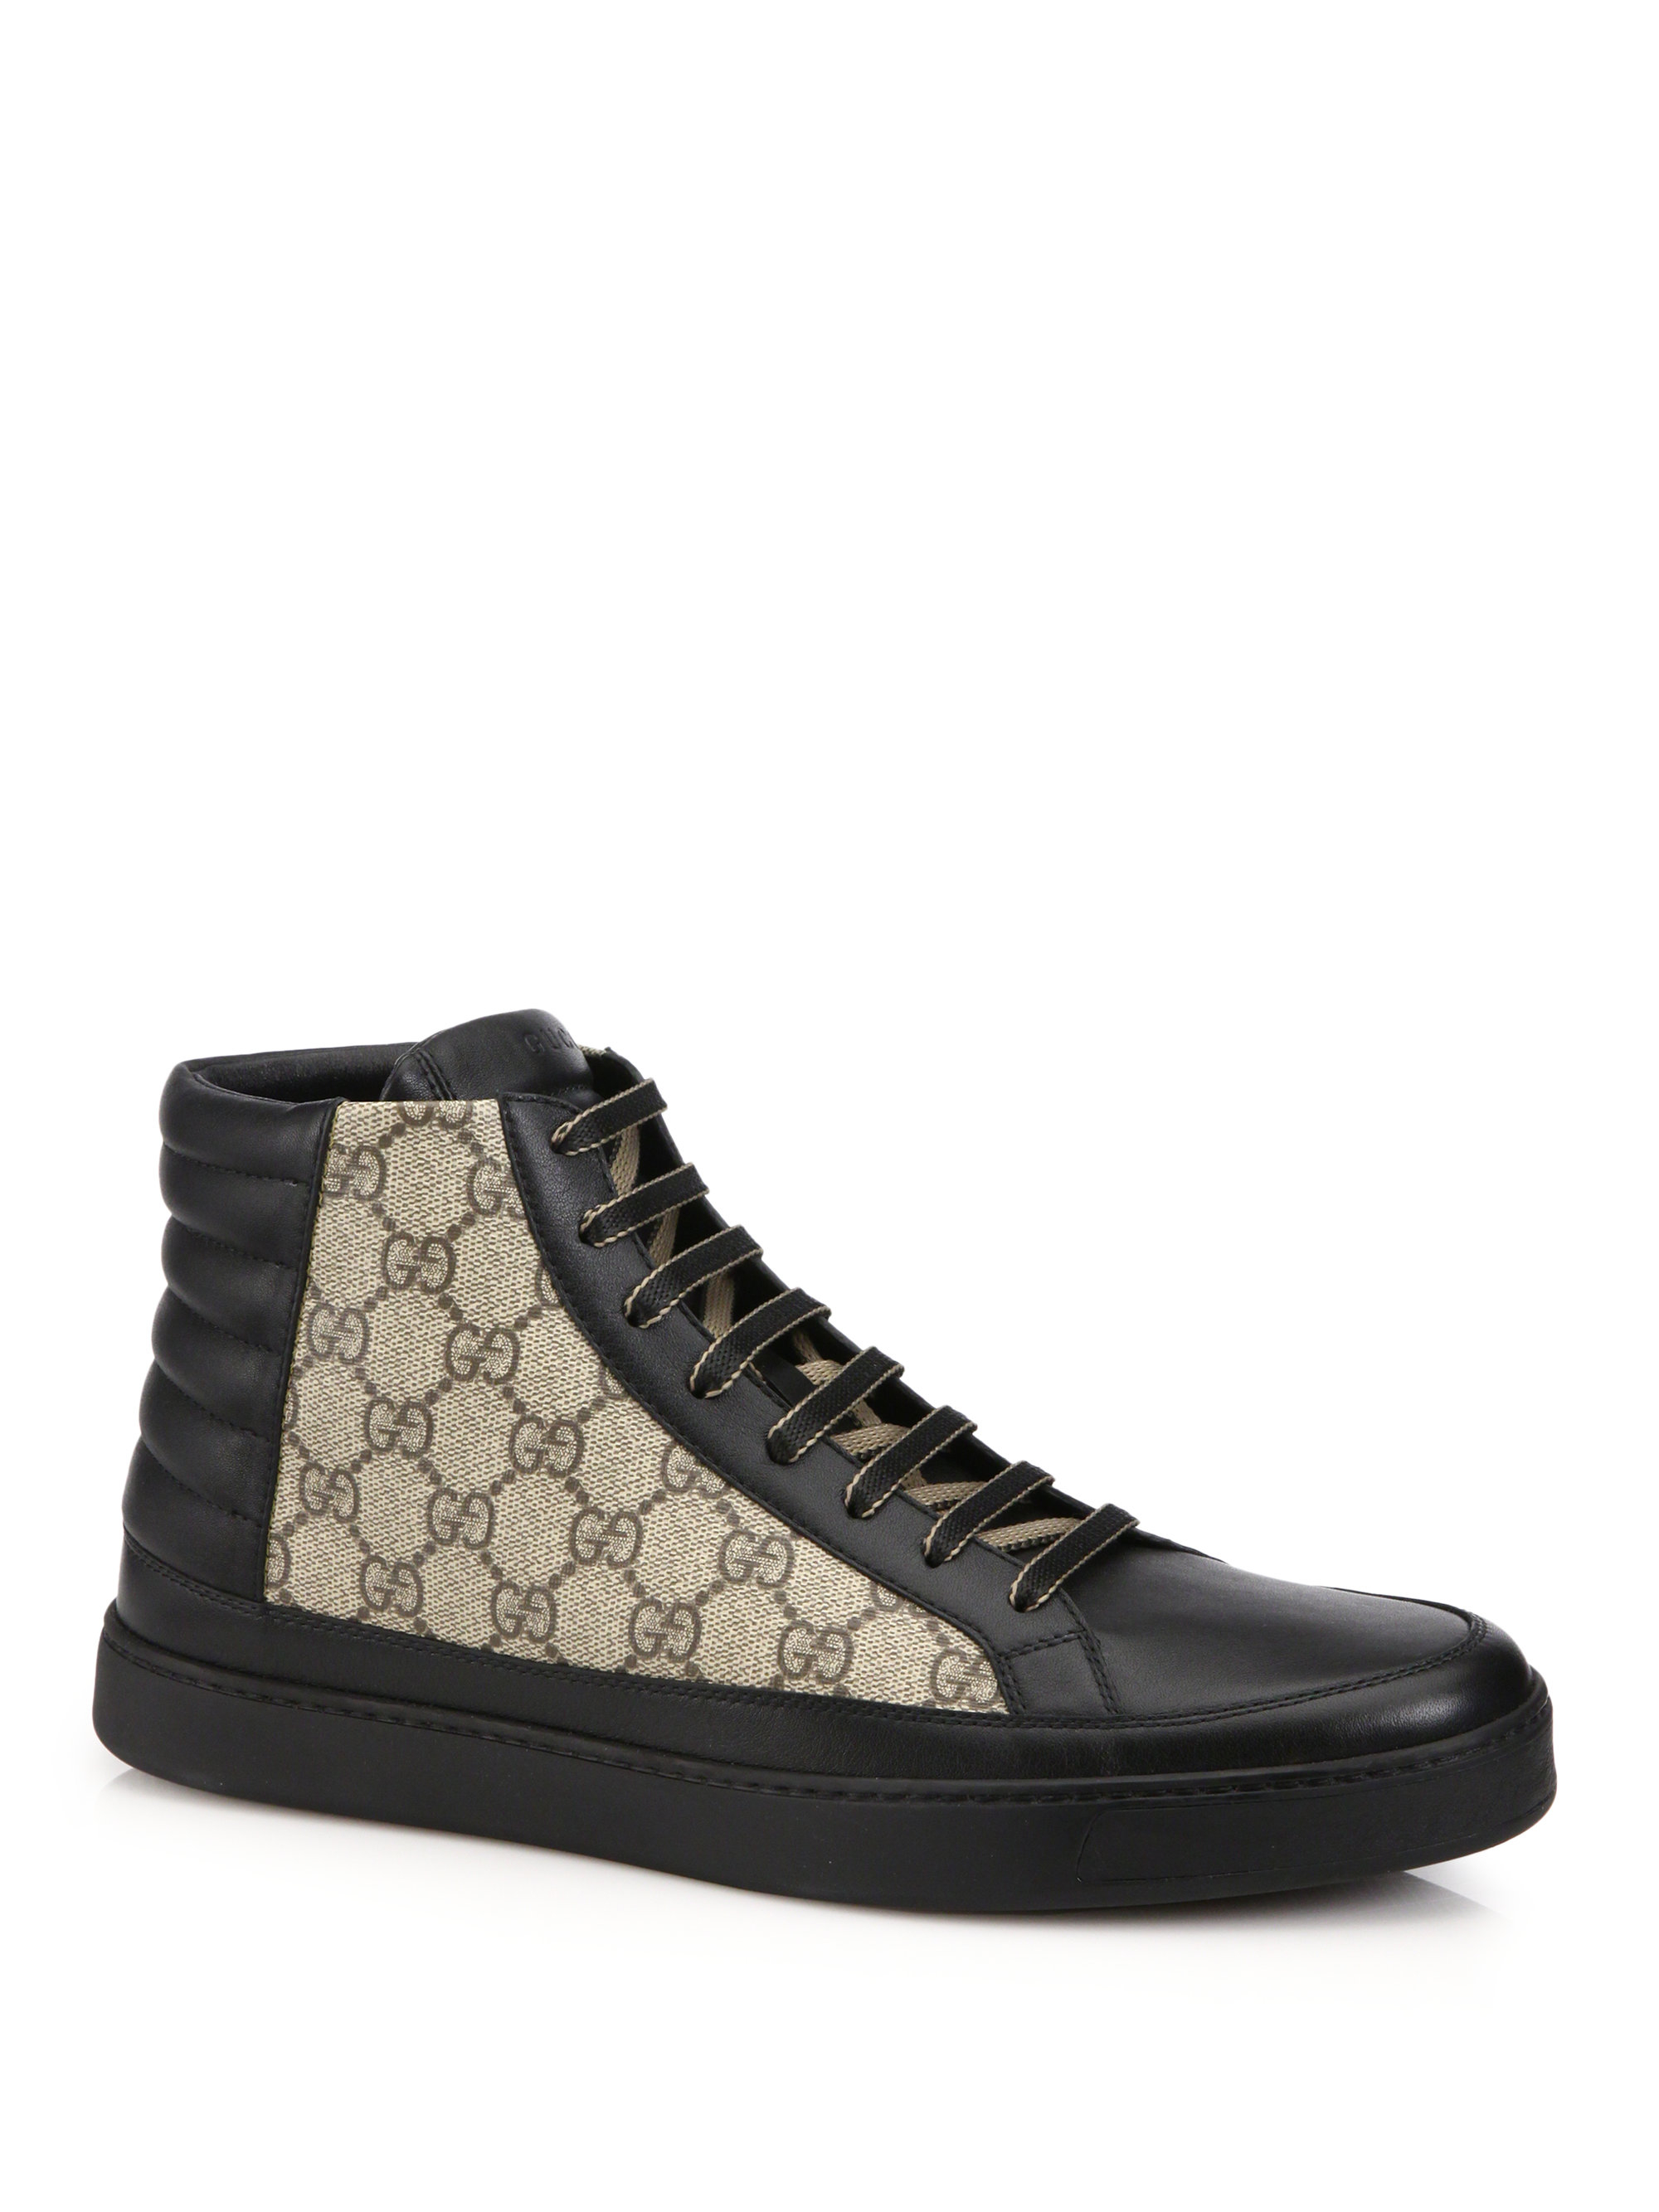 Gucci Gg Supreme Canvas & Leather High-top Sneakers in Black for Men ...